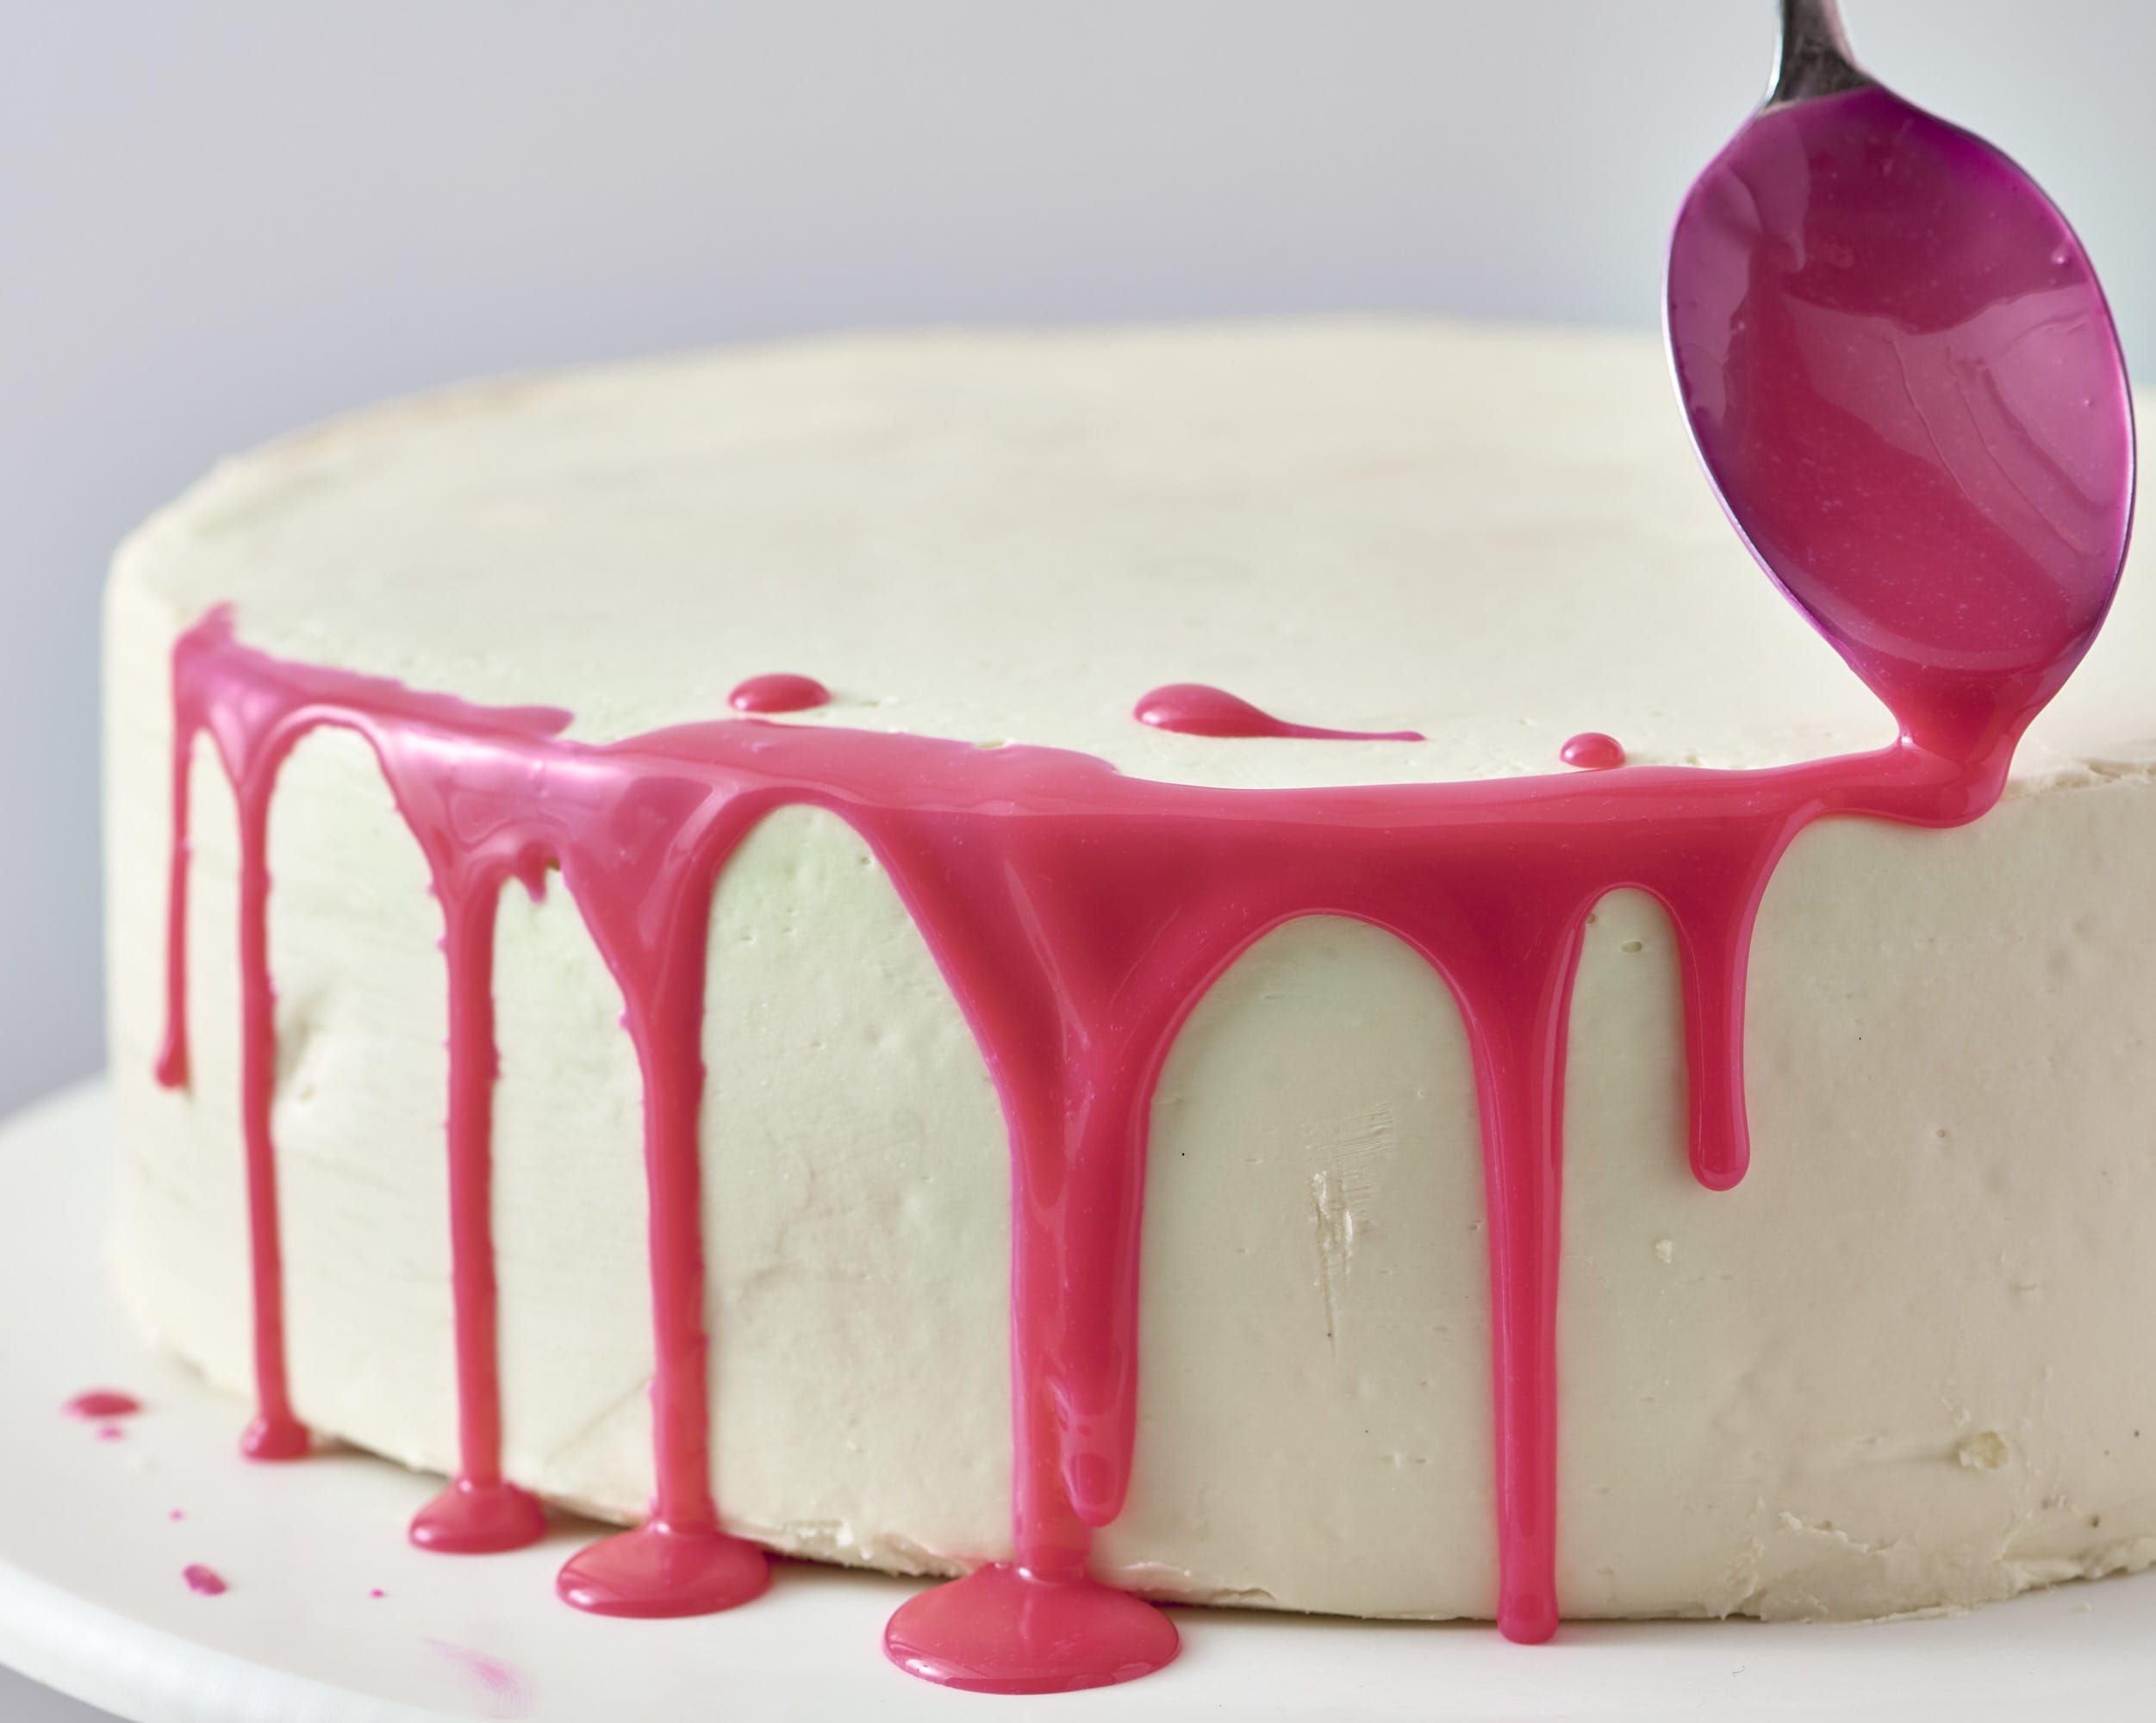 How To Create a Drip Frosting Effect on Any Cake